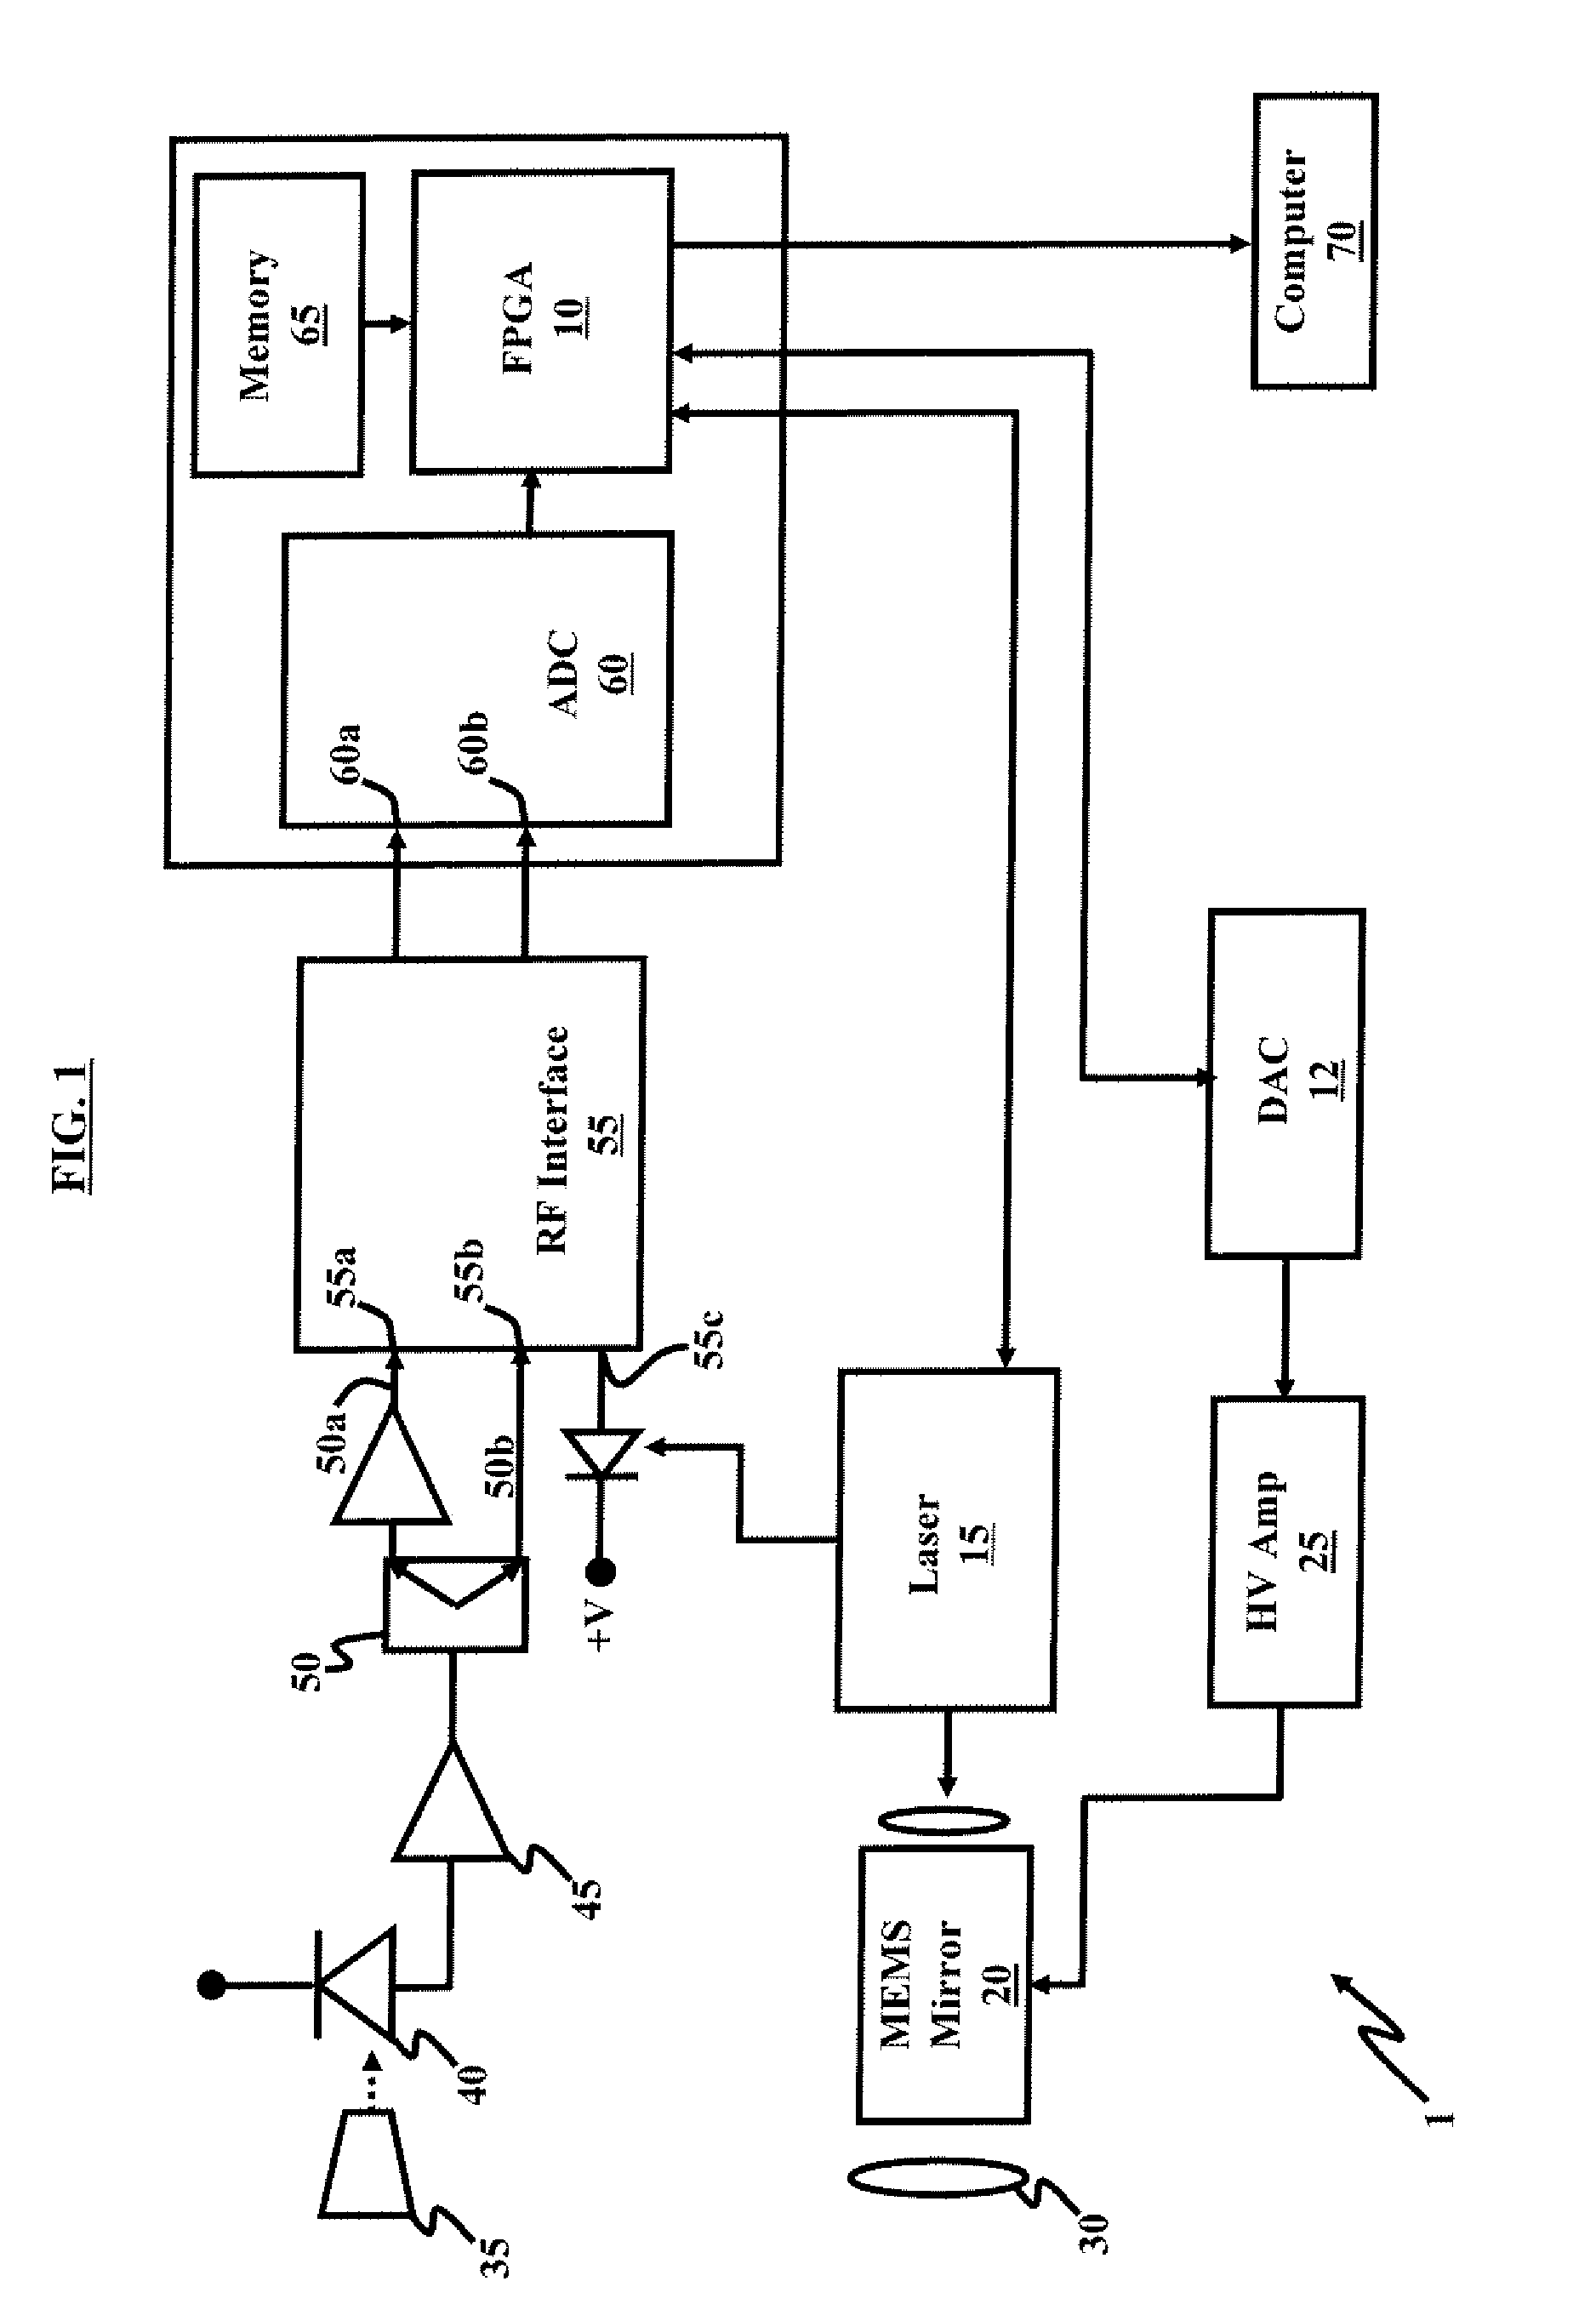 Ladar transmitting and receiving system and method